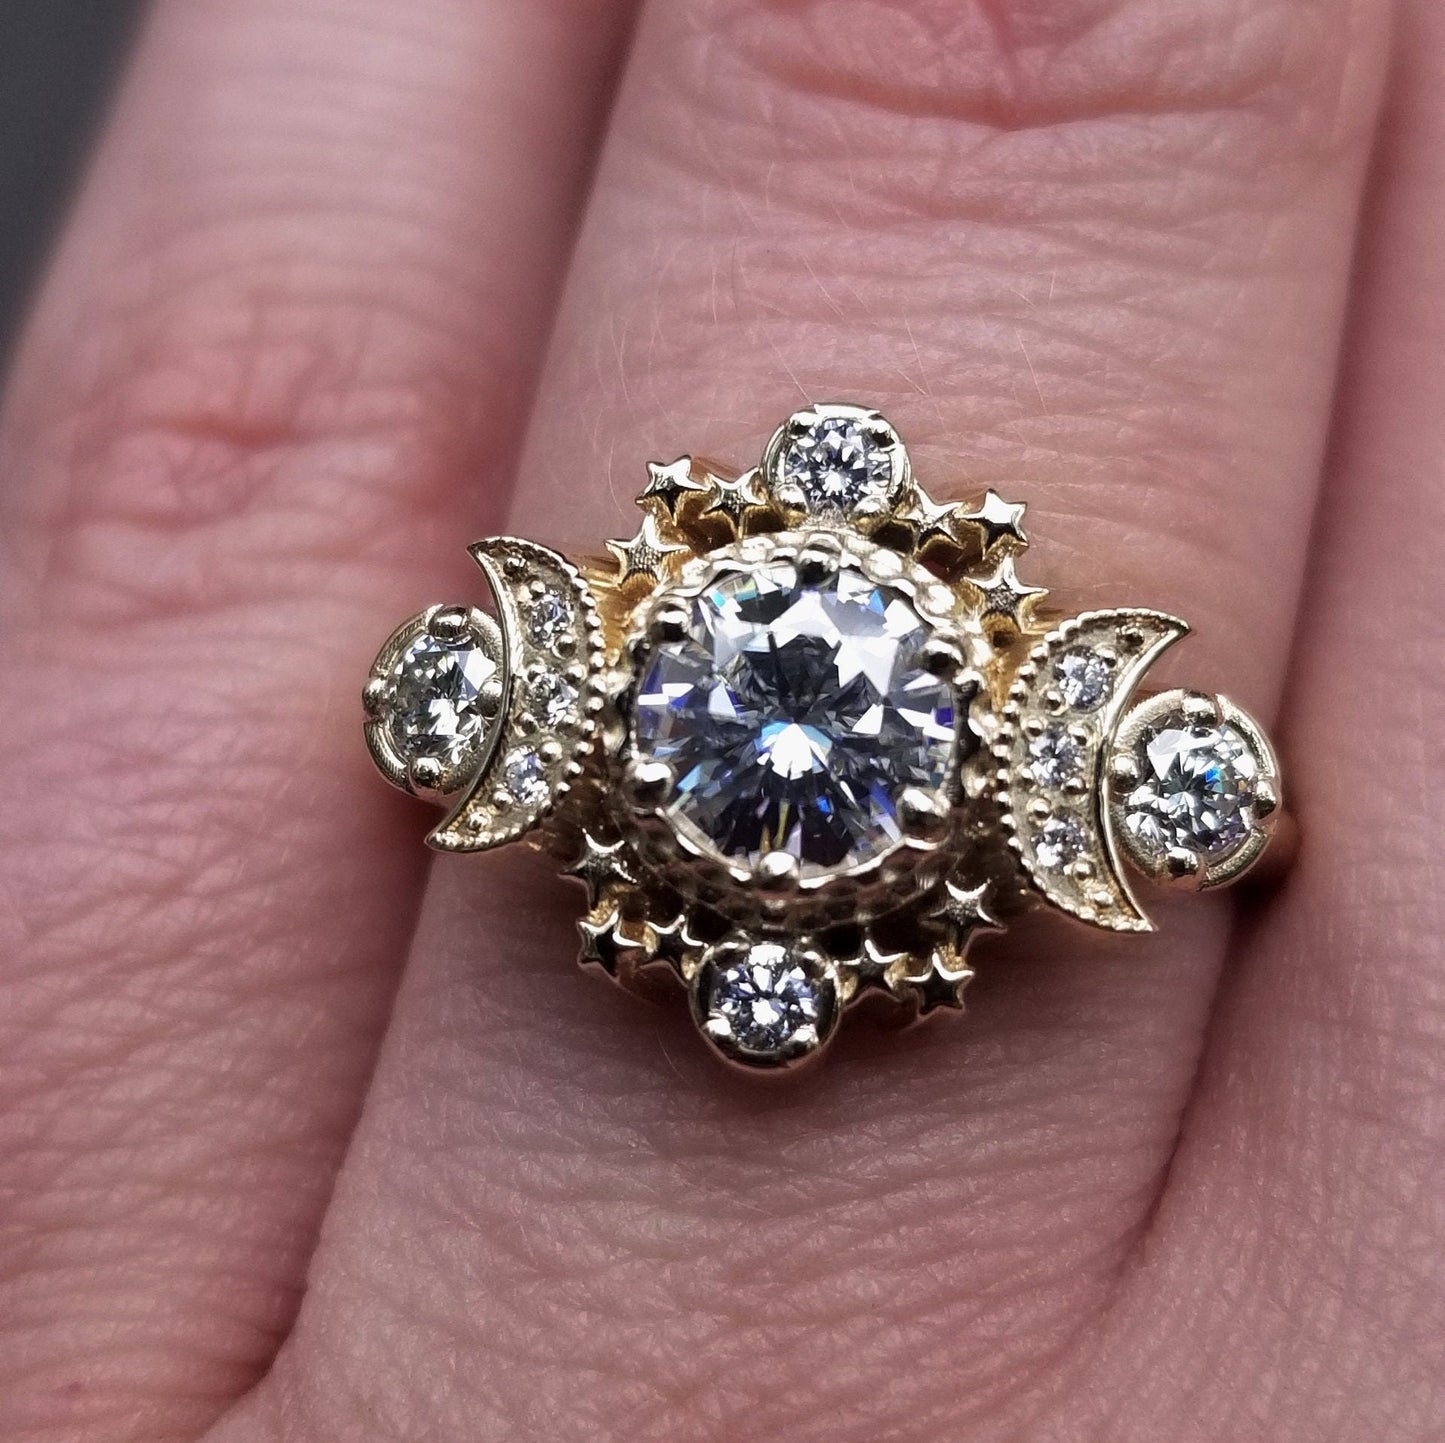 Engagement Ring Old European Cut Moissanite & Diamond Cosmos Moon and Stars  - Unique Unusual Handmade - 14k Gold - Ethical Wedding Ring